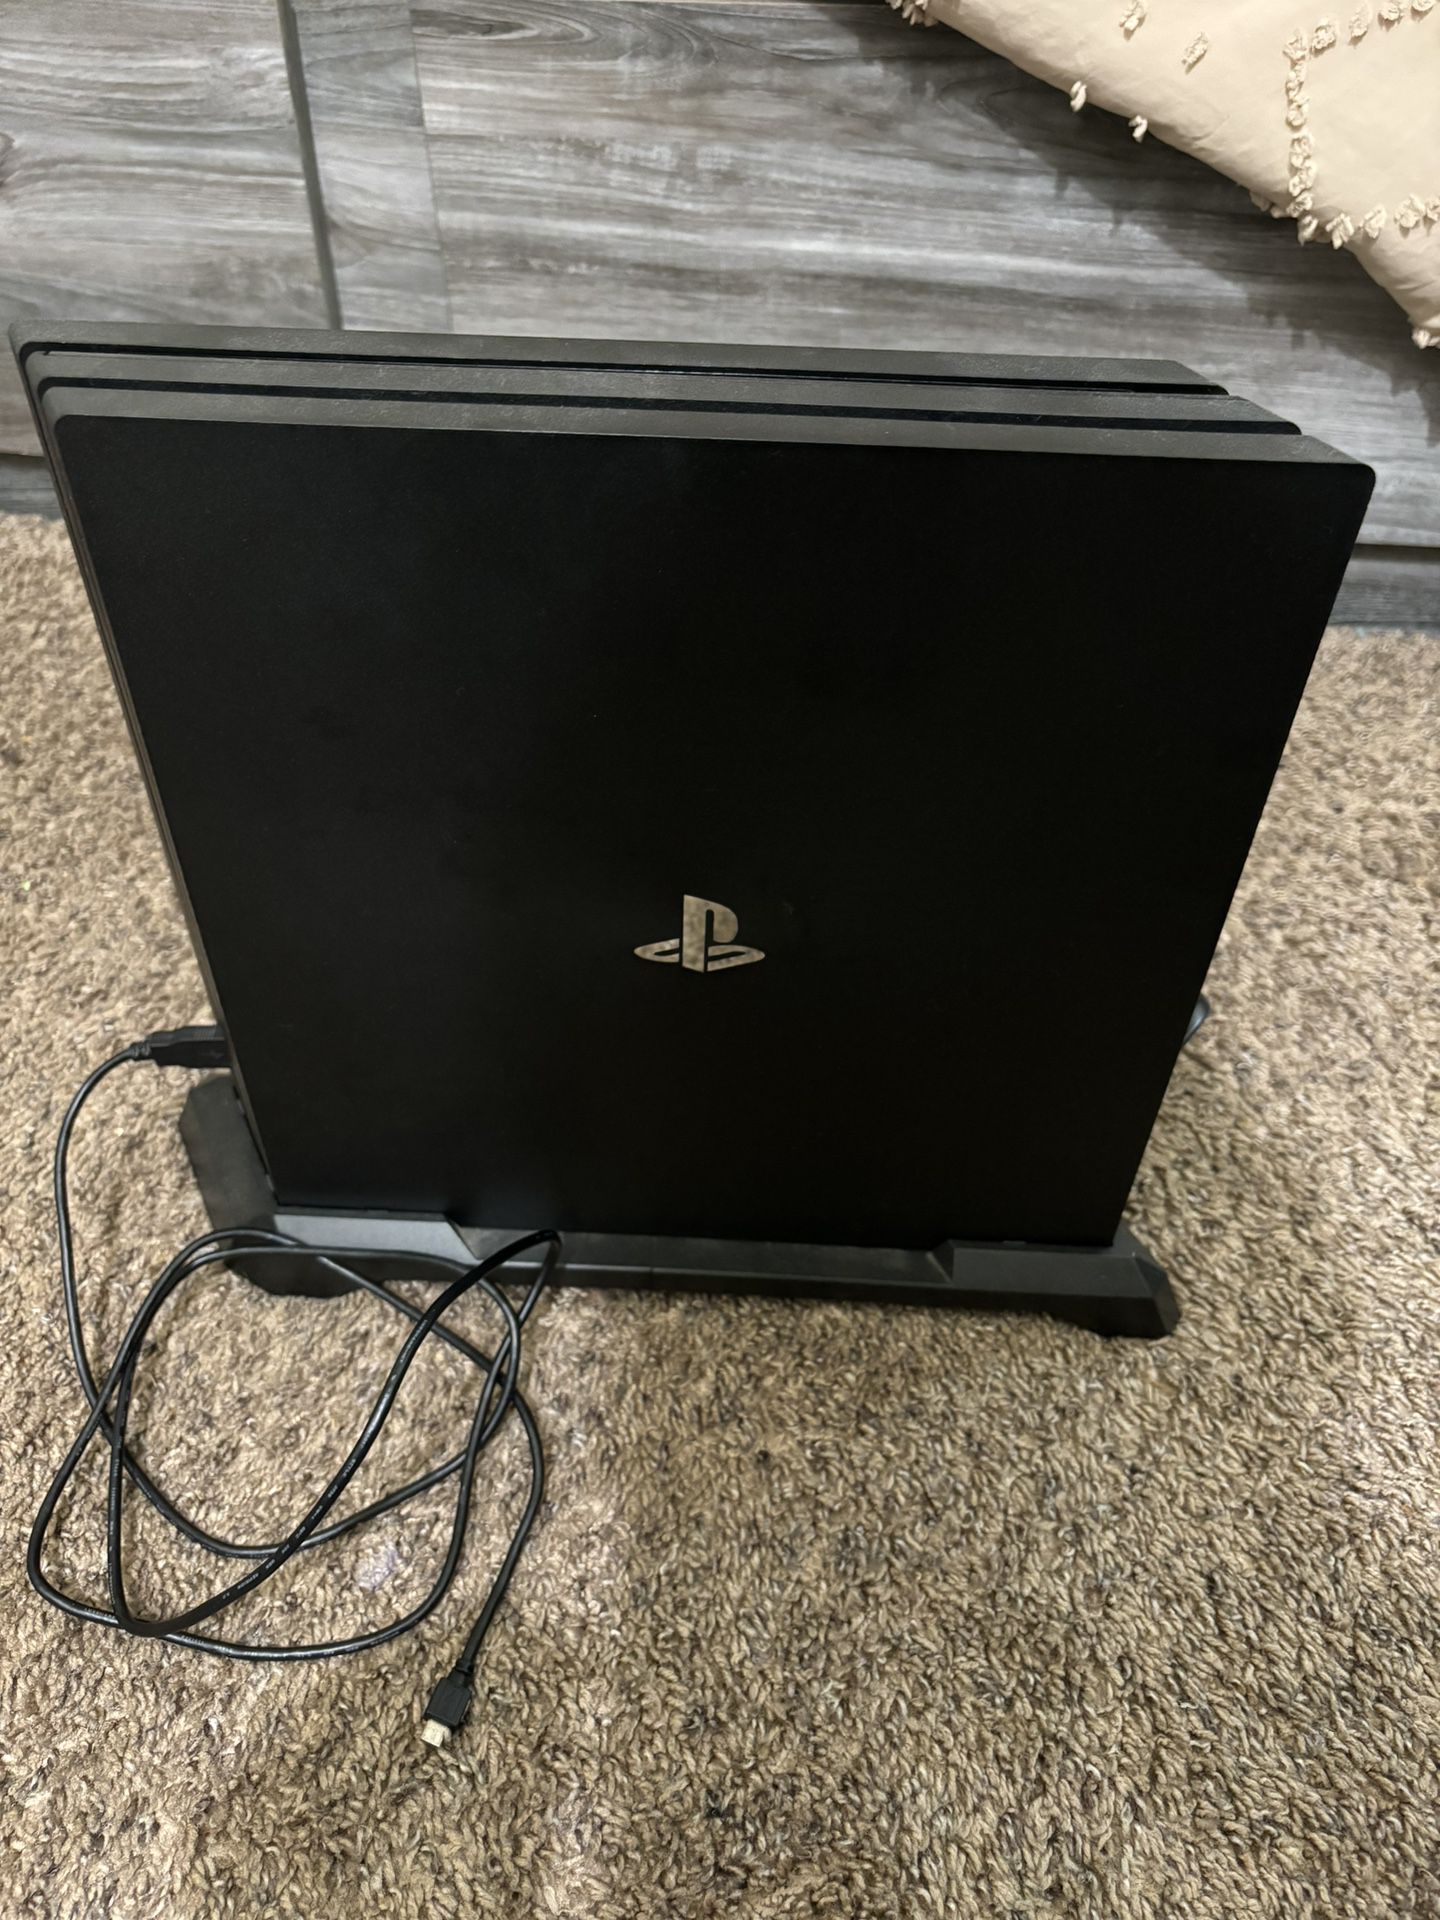 Ps4 Pro With 4 Controllers